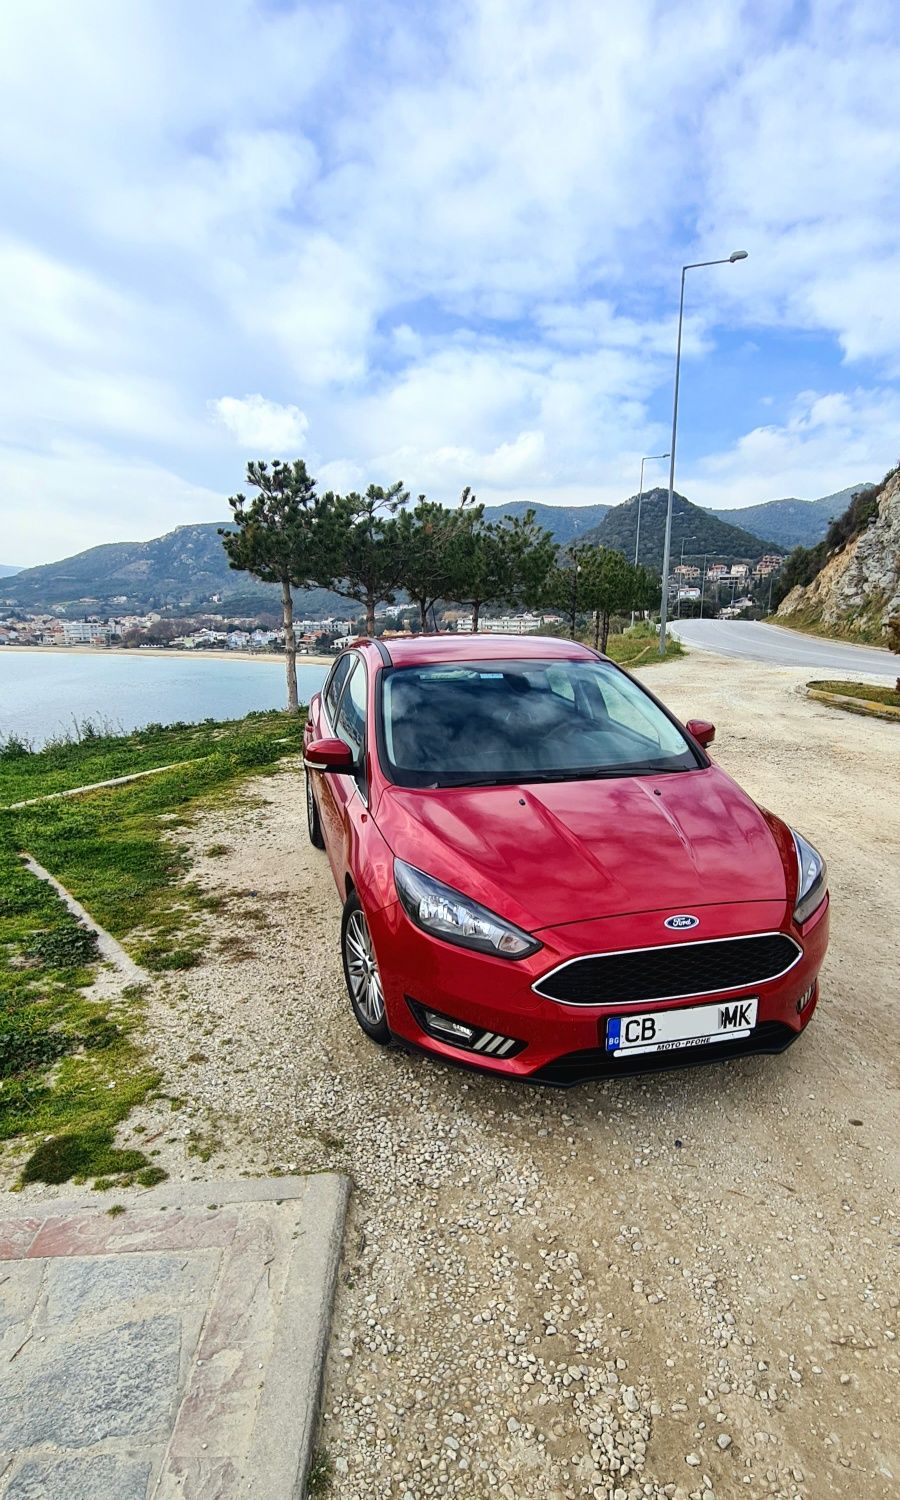 Ford Focus 1.0 Ecoboost, 58000 km,  Безупречен